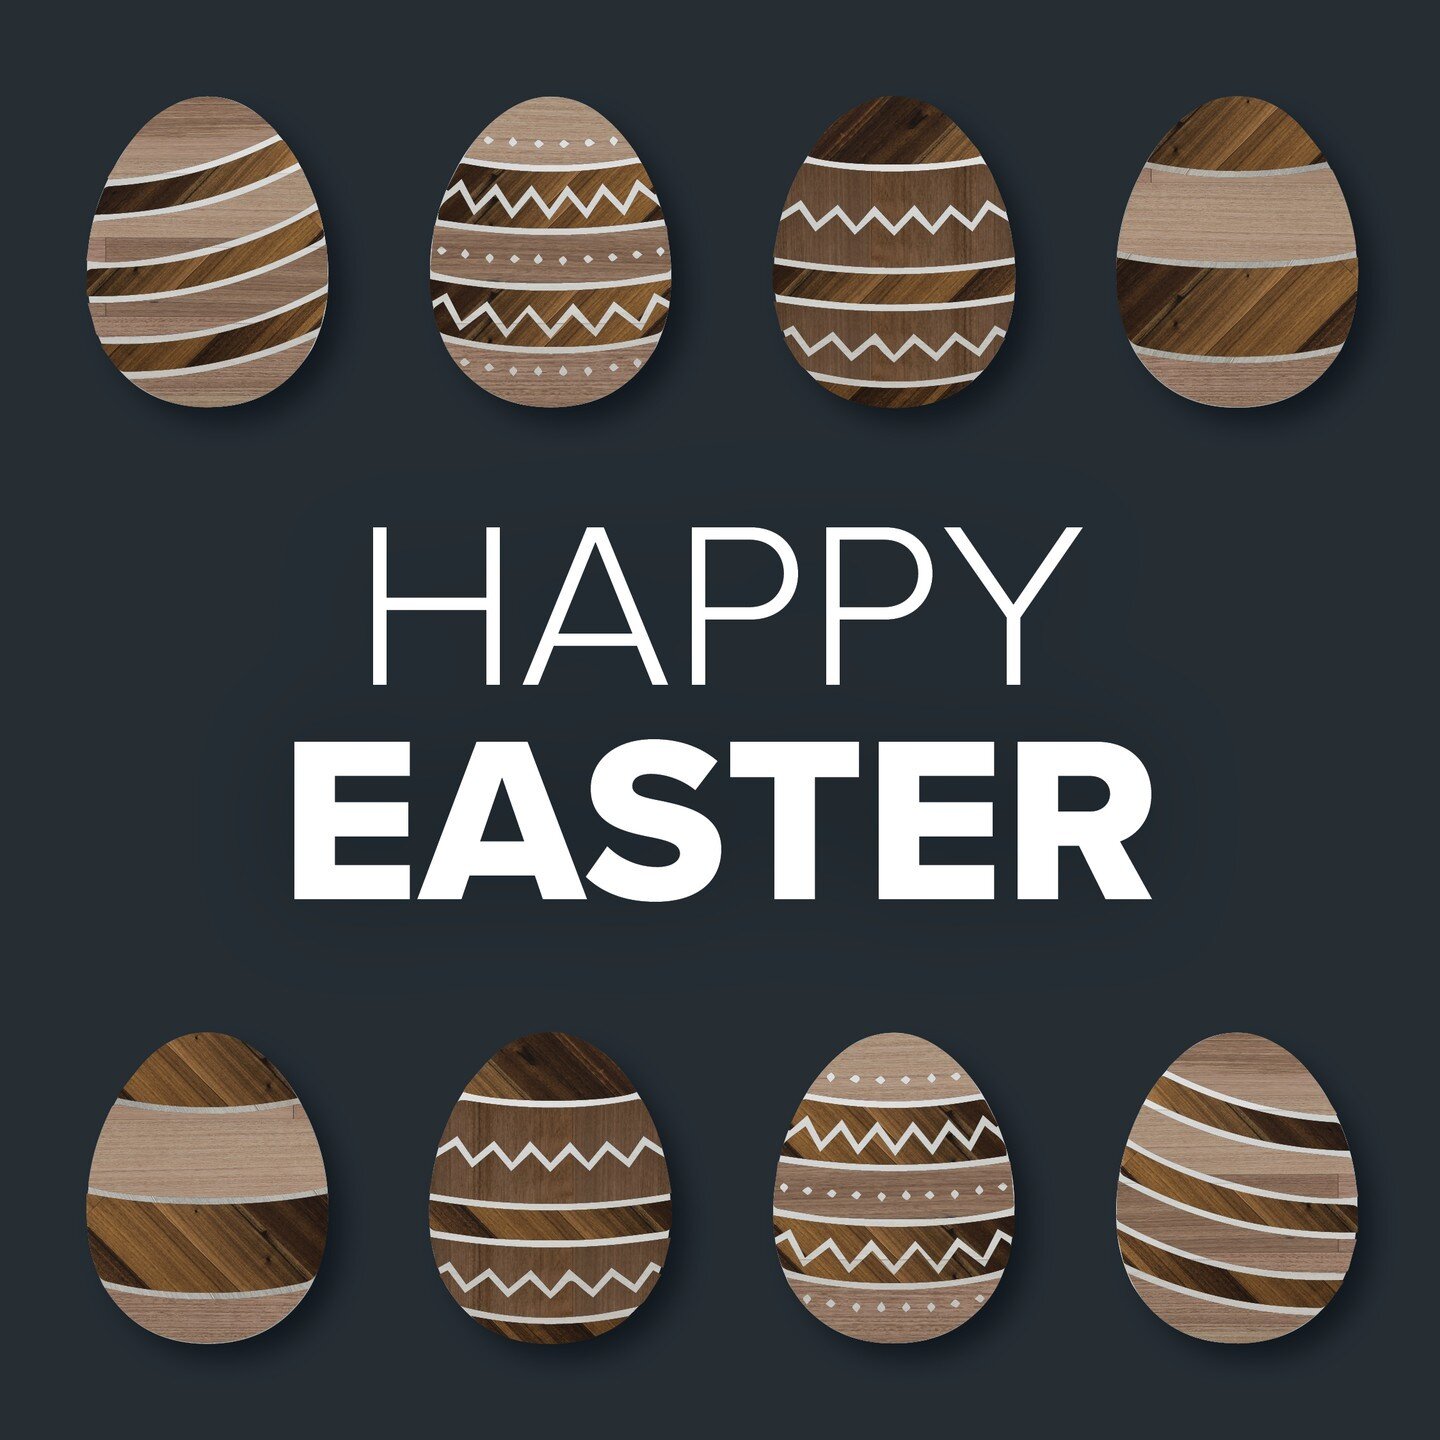 Happy Easter from the NSFP team!

NSFP wishes everyone a happy and restful Easter long weekend.